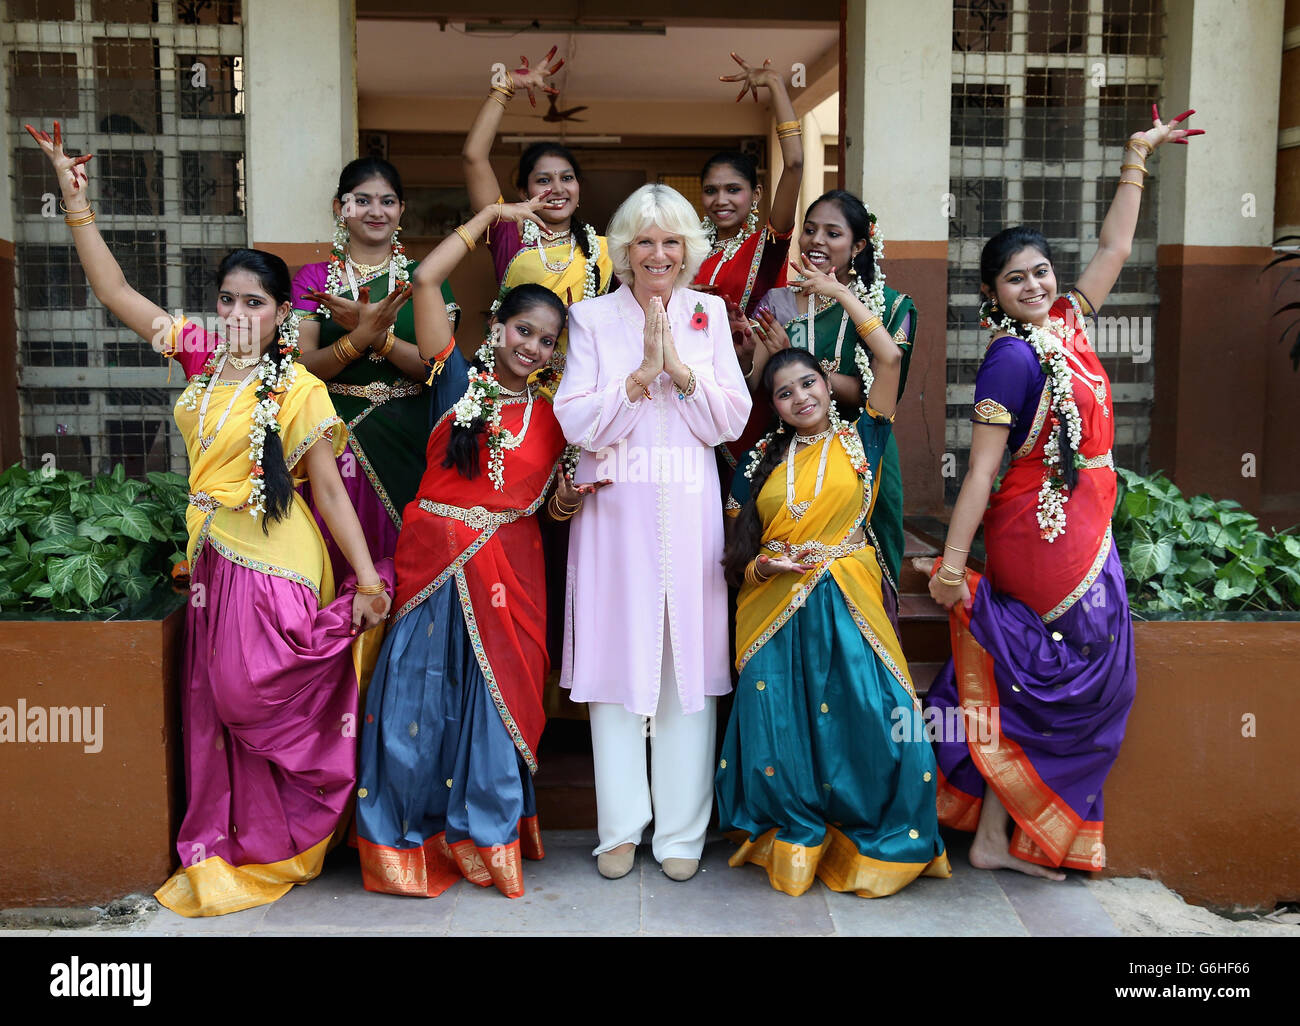 The Duchess of Cornwall is shown some Indian dance moves by girls from Asha Sadan (House of Hope) for children who have been abandoned or abused, in Mumbai, on the fourth day of their official visit to India and Sri Lanka. PRESS ASSOCIATION Photo. Picture date: Saturday November 9, 2013. See PA story ROYAL Tour. Photo credit should read: Chris Jackson/PA Wire Stock Photo